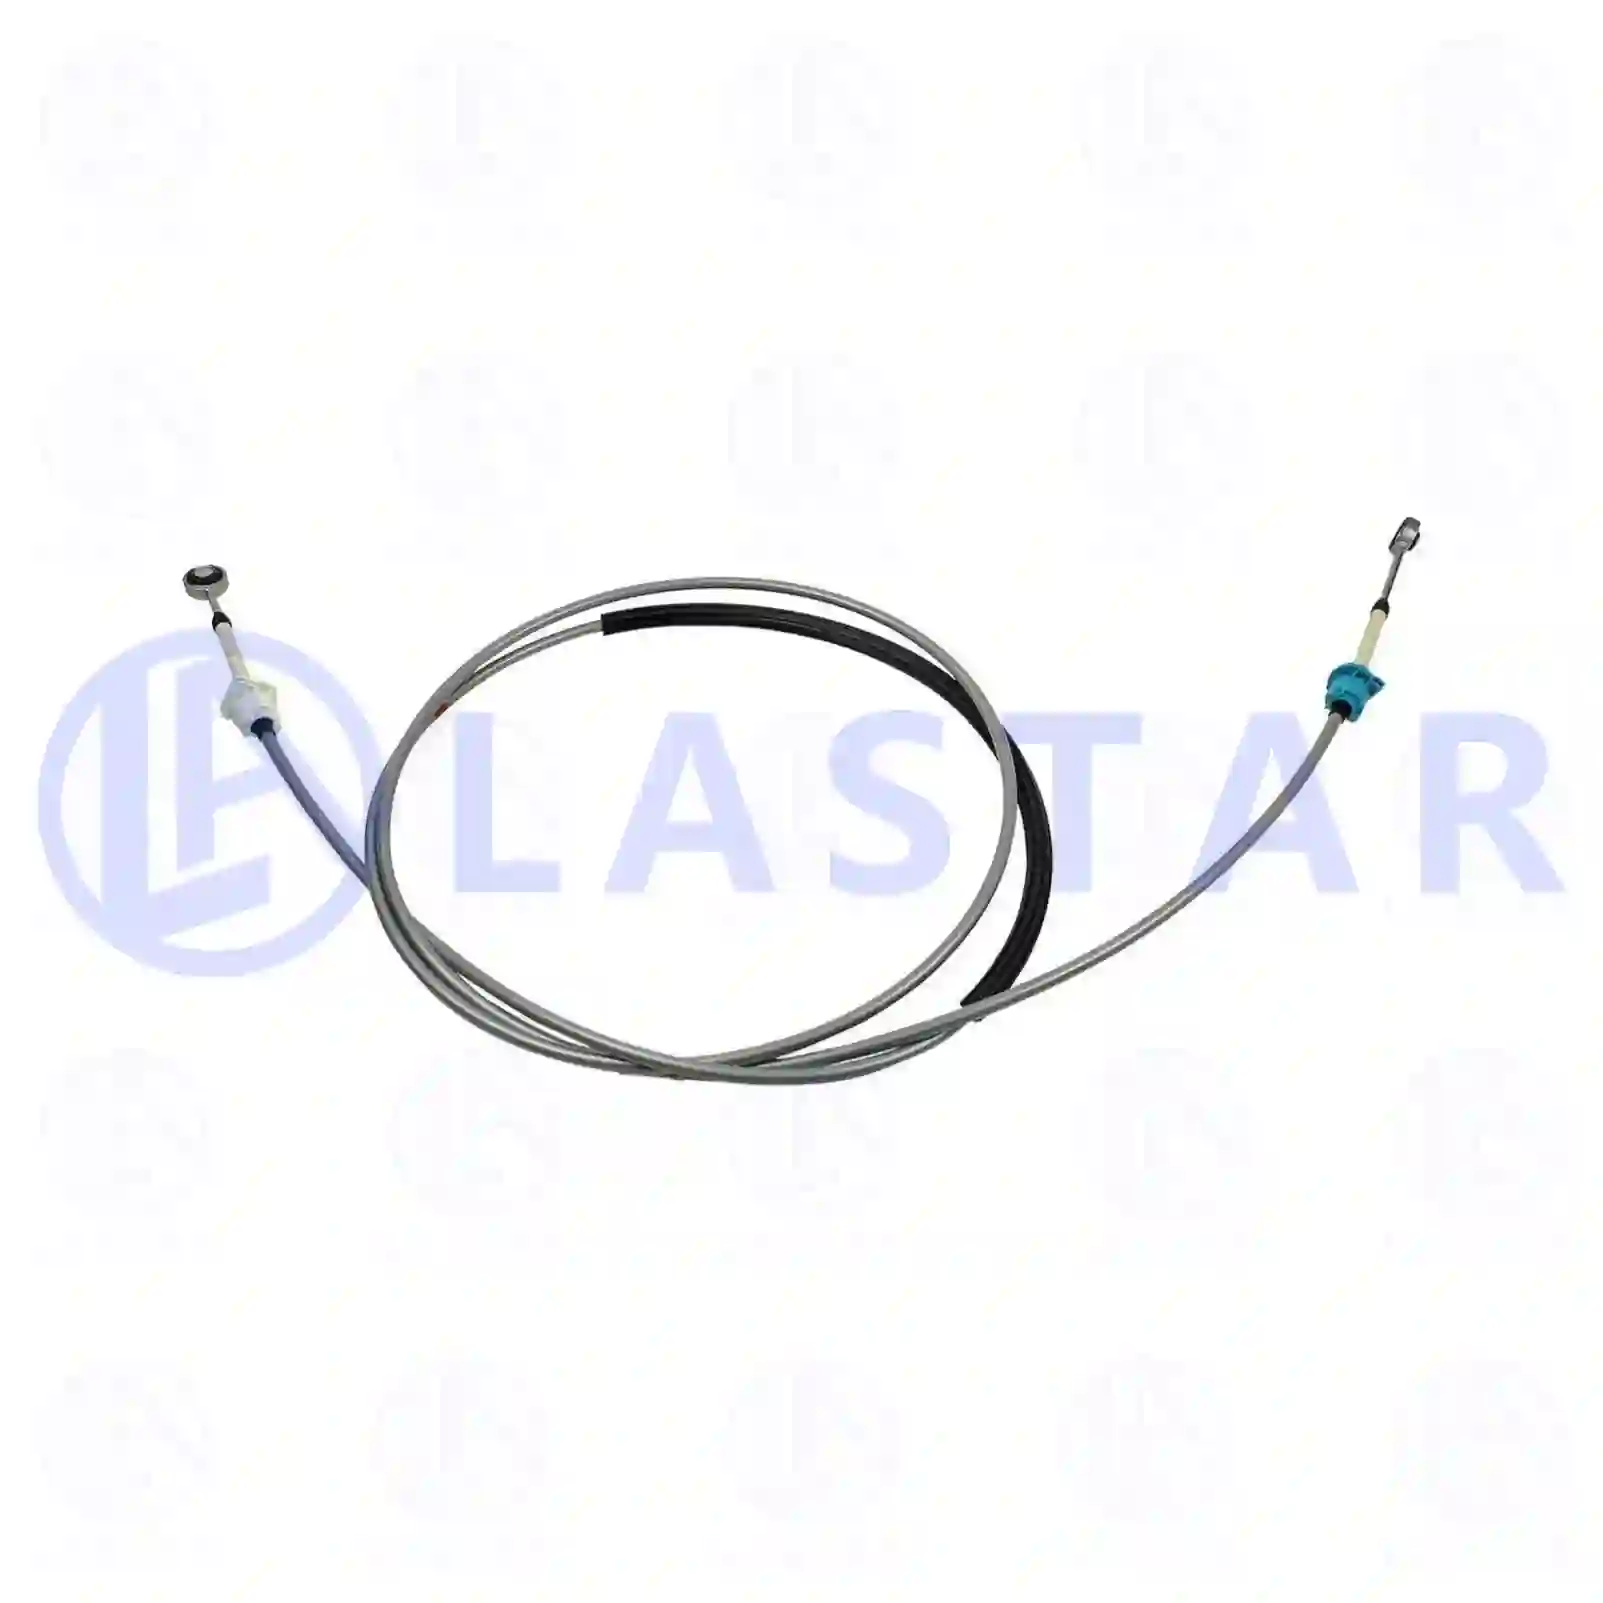 Control cable, switching, 77732705, 21343543, 21789699, ZG21351-0008 ||  77732705 Lastar Spare Part | Truck Spare Parts, Auotomotive Spare Parts Control cable, switching, 77732705, 21343543, 21789699, ZG21351-0008 ||  77732705 Lastar Spare Part | Truck Spare Parts, Auotomotive Spare Parts